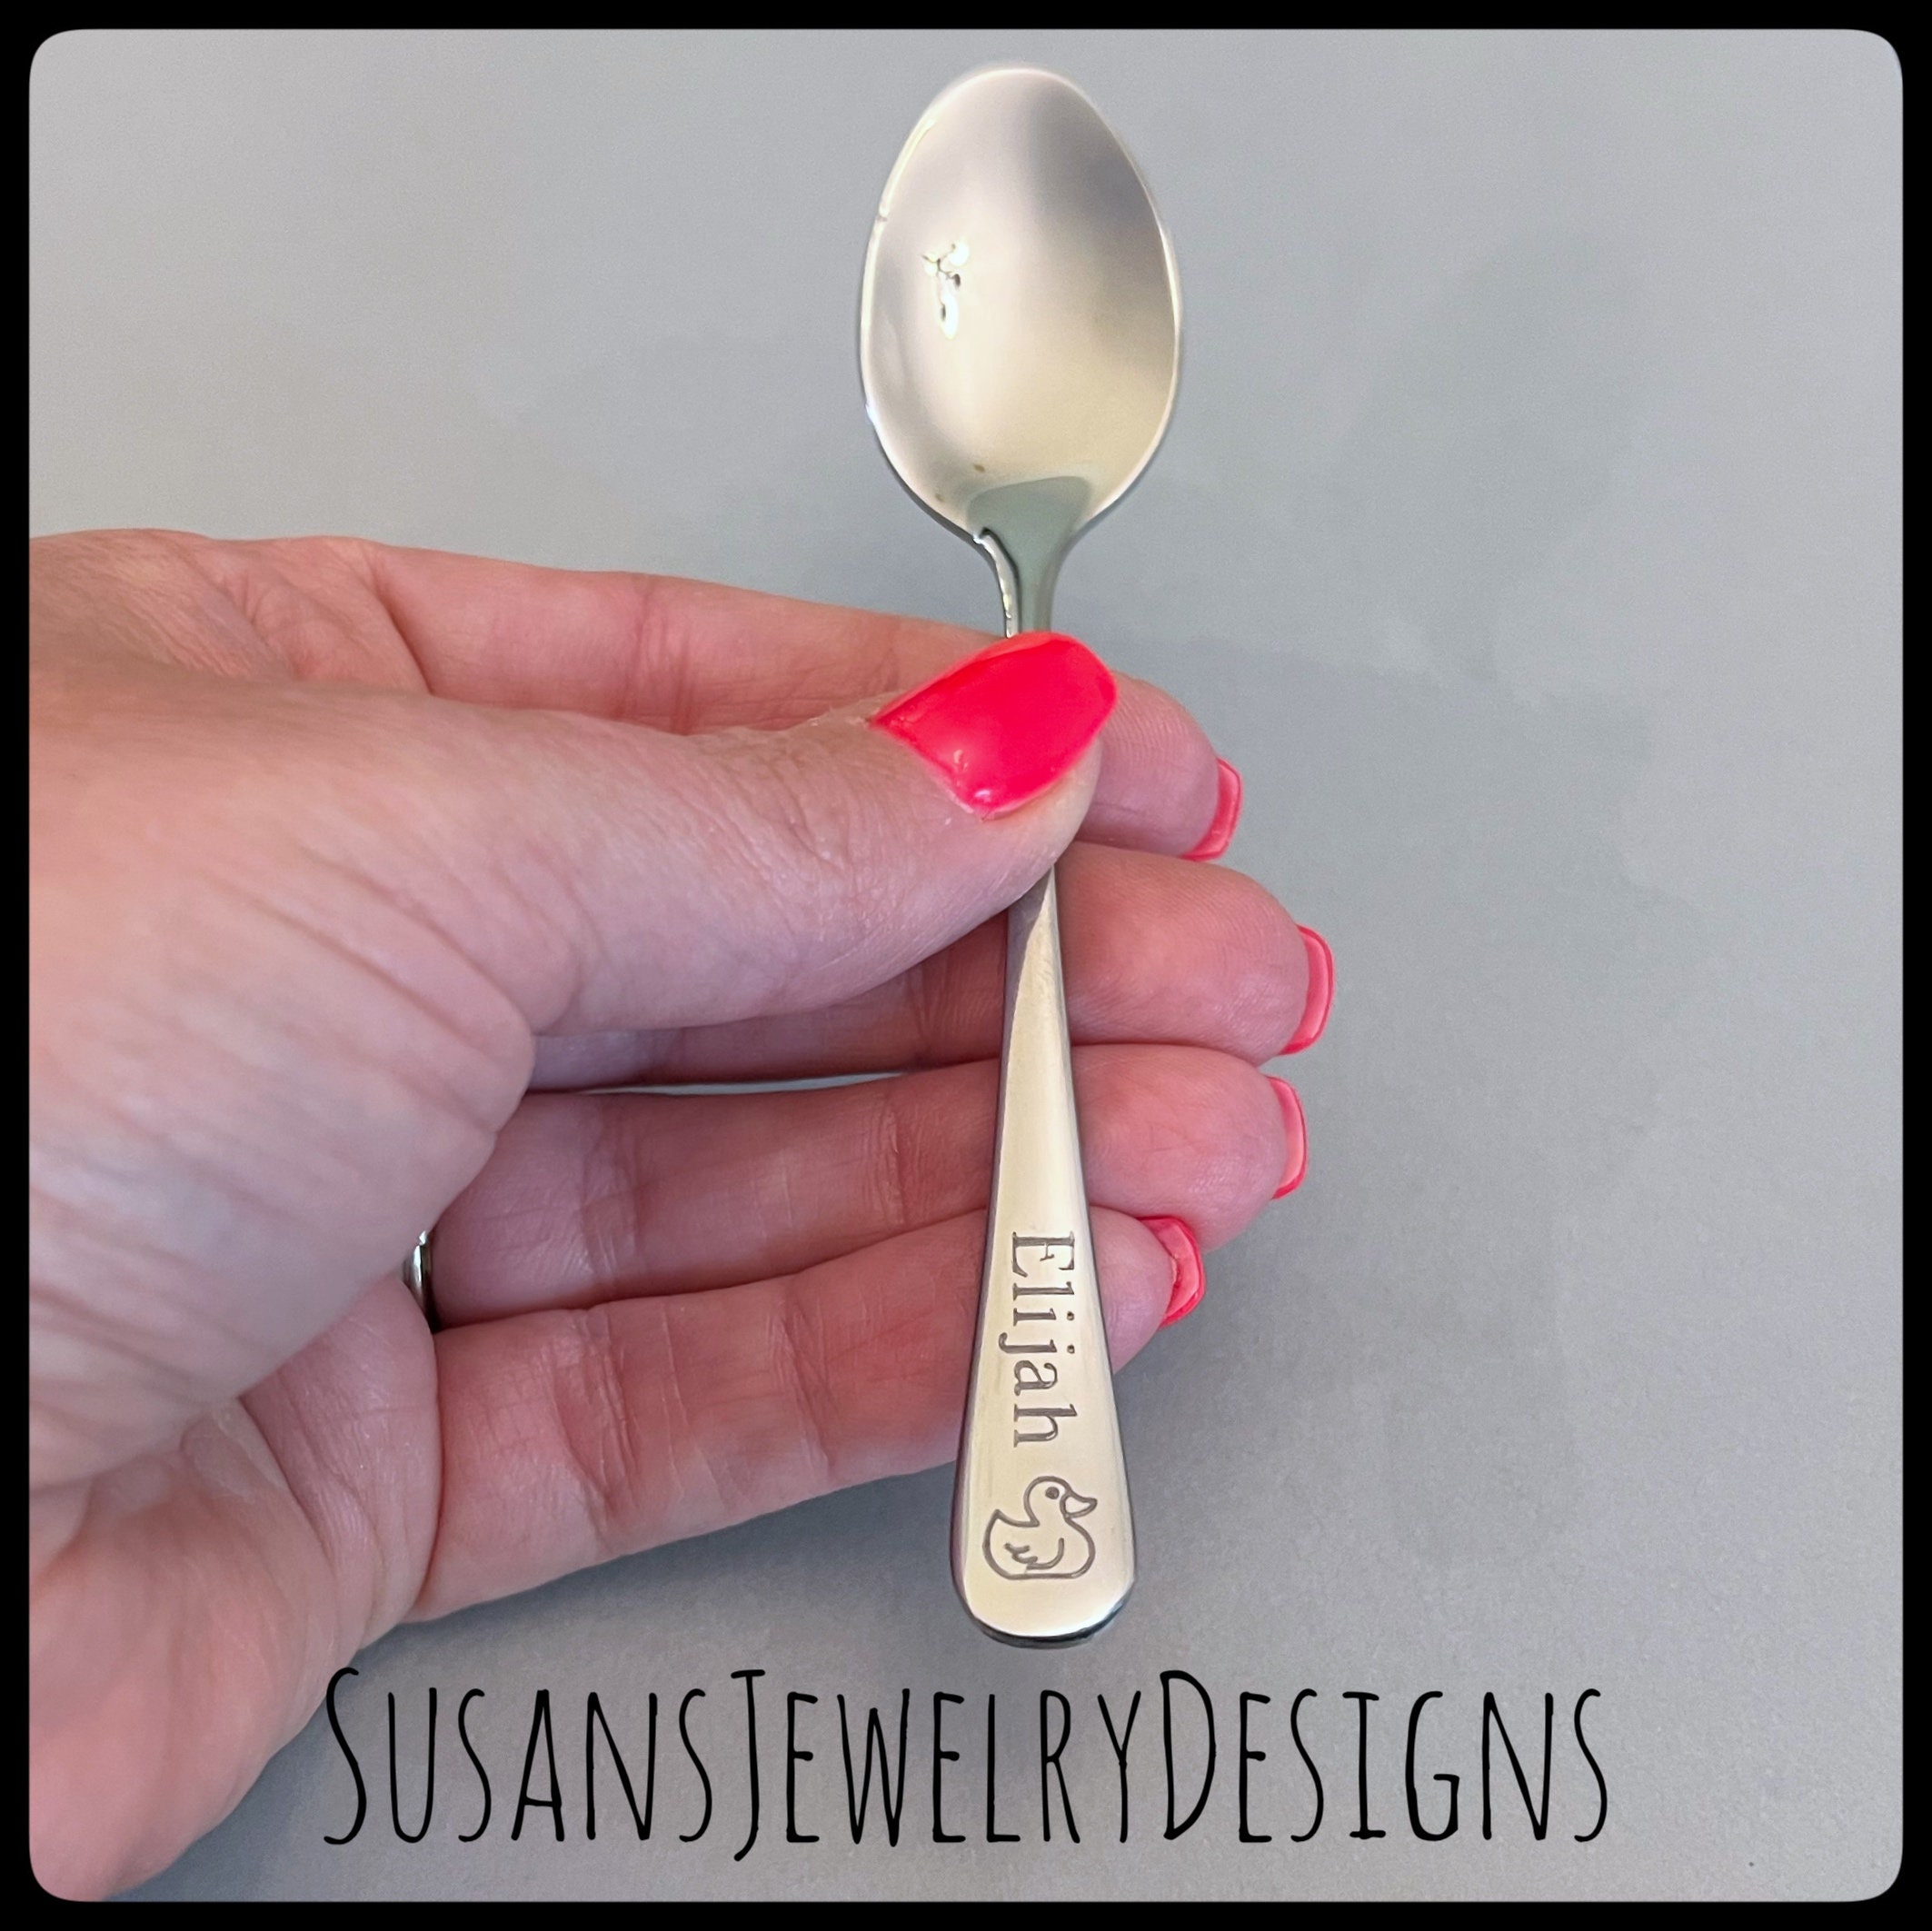 Baby Spoons Custom Engraved Baby's Name, Baby Shower Gift, Present,  Personalized Baby Safety Spoon, Munchkin White Hot, Pregnancy Reveal 